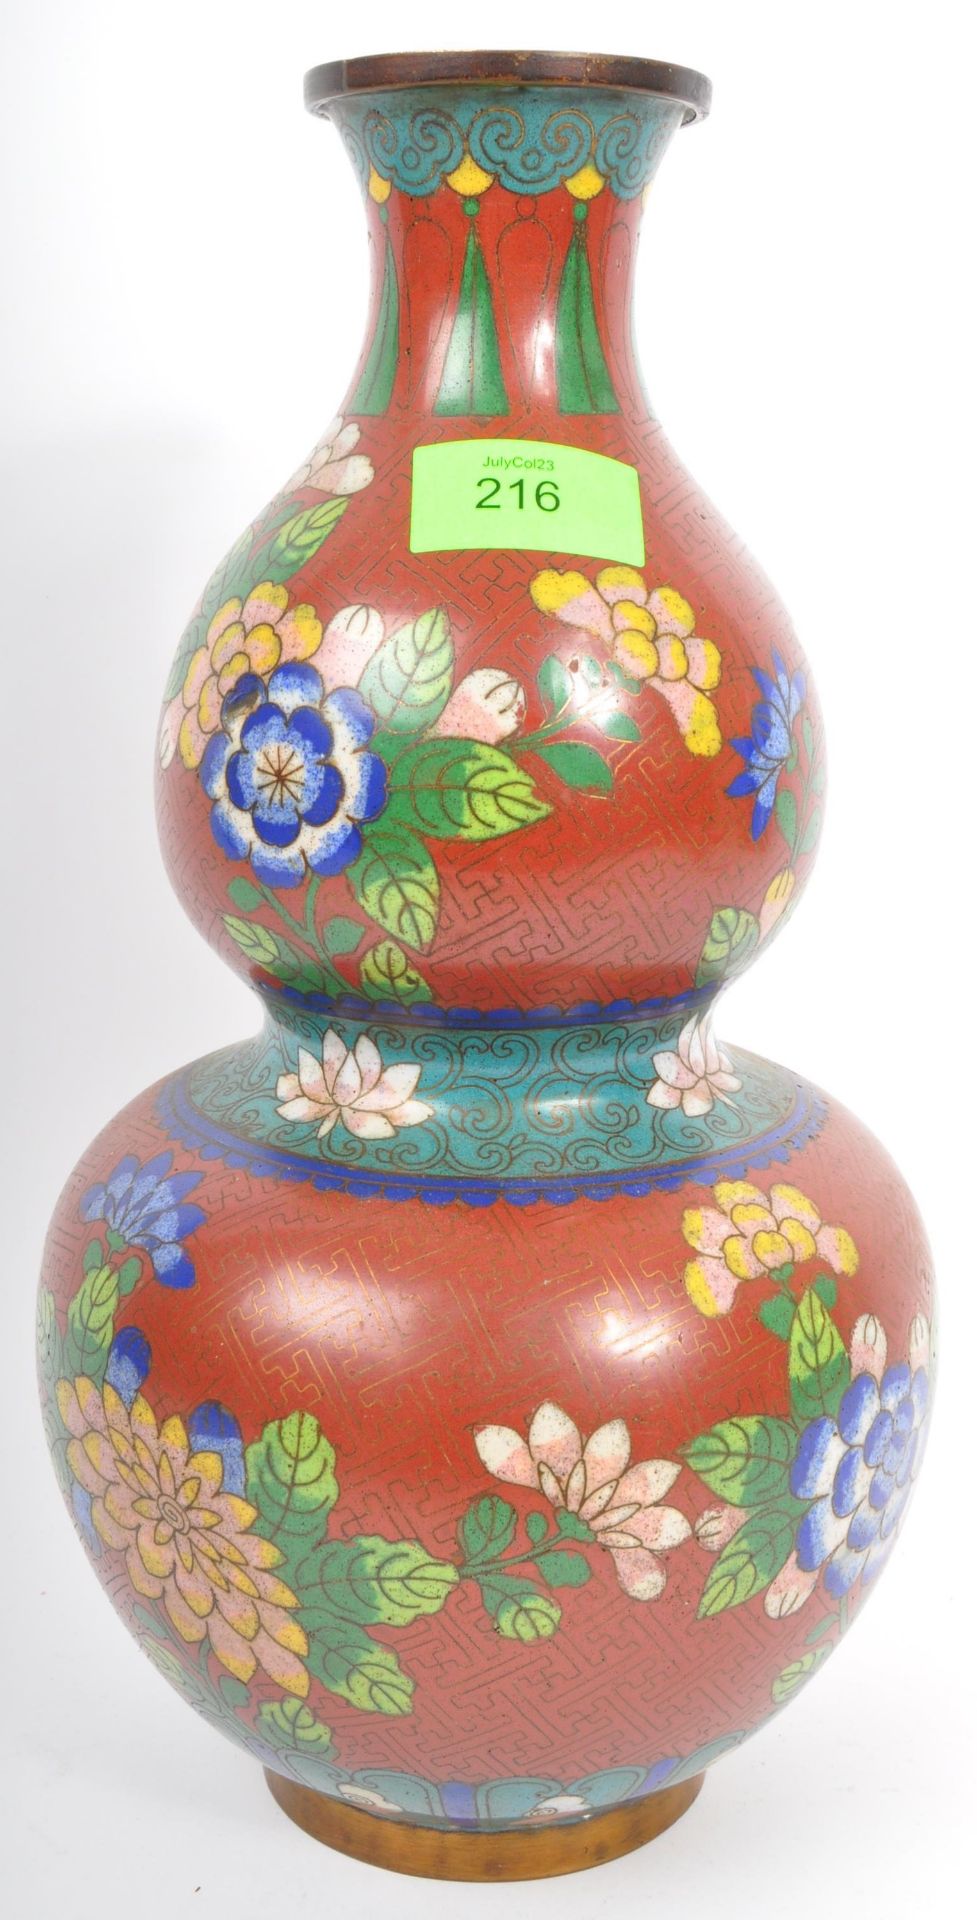 EARLY 20TH CENTURY CHINESE ORIENTAL CLOISONNE DUAL GOURD VASE - Image 2 of 6